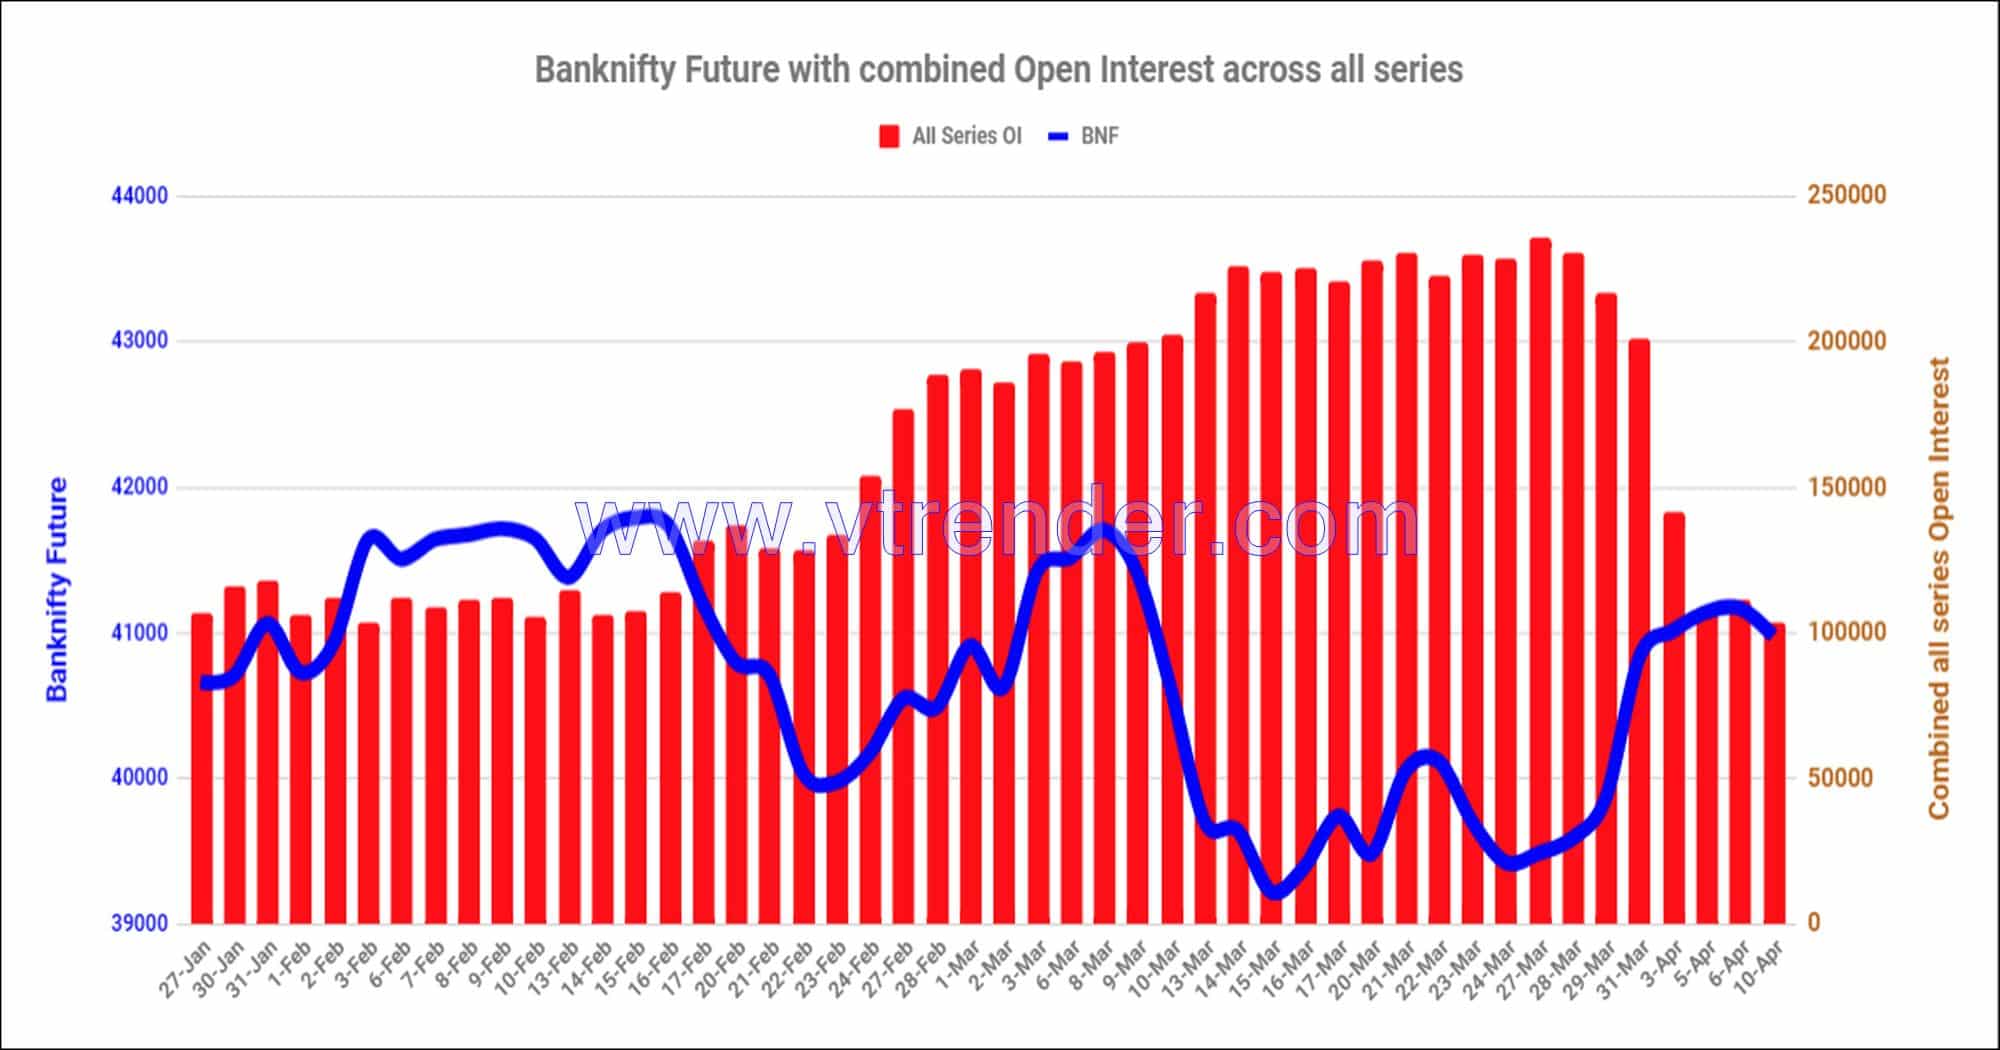 Bnf10Apr Nifty And Banknifty Futures With All Series Combined Open Interest – 10Th Apr 2023 Banknifty, Nifty, Open Interest